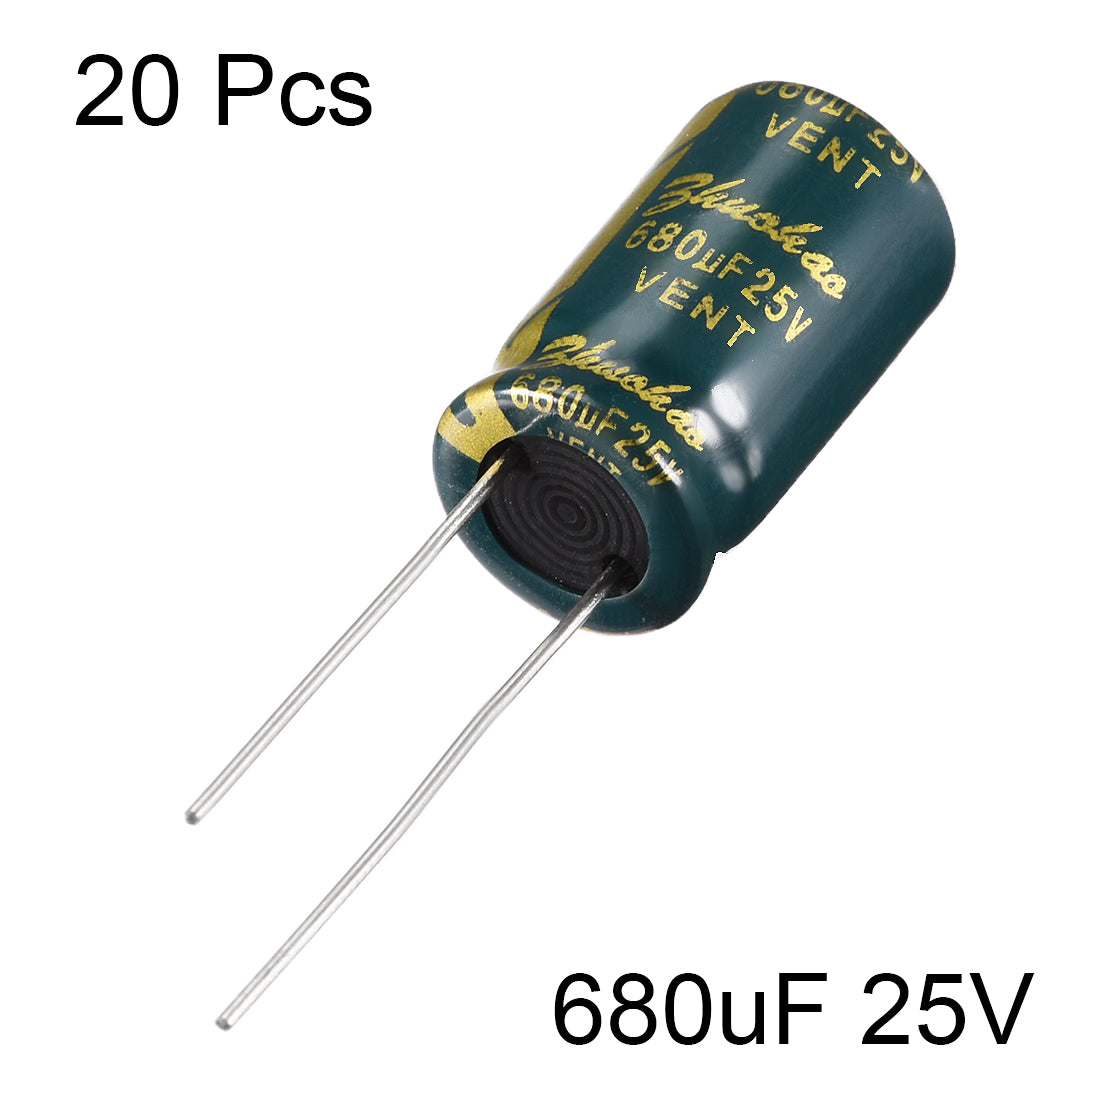 uxcell Uxcell Aluminum Radial Electrolytic Capacitor Low ESR Green with 680uF 25V 105 Celsius Life 3000H 10 x 17mm High Ripple Current,Low Impedance 20pcs